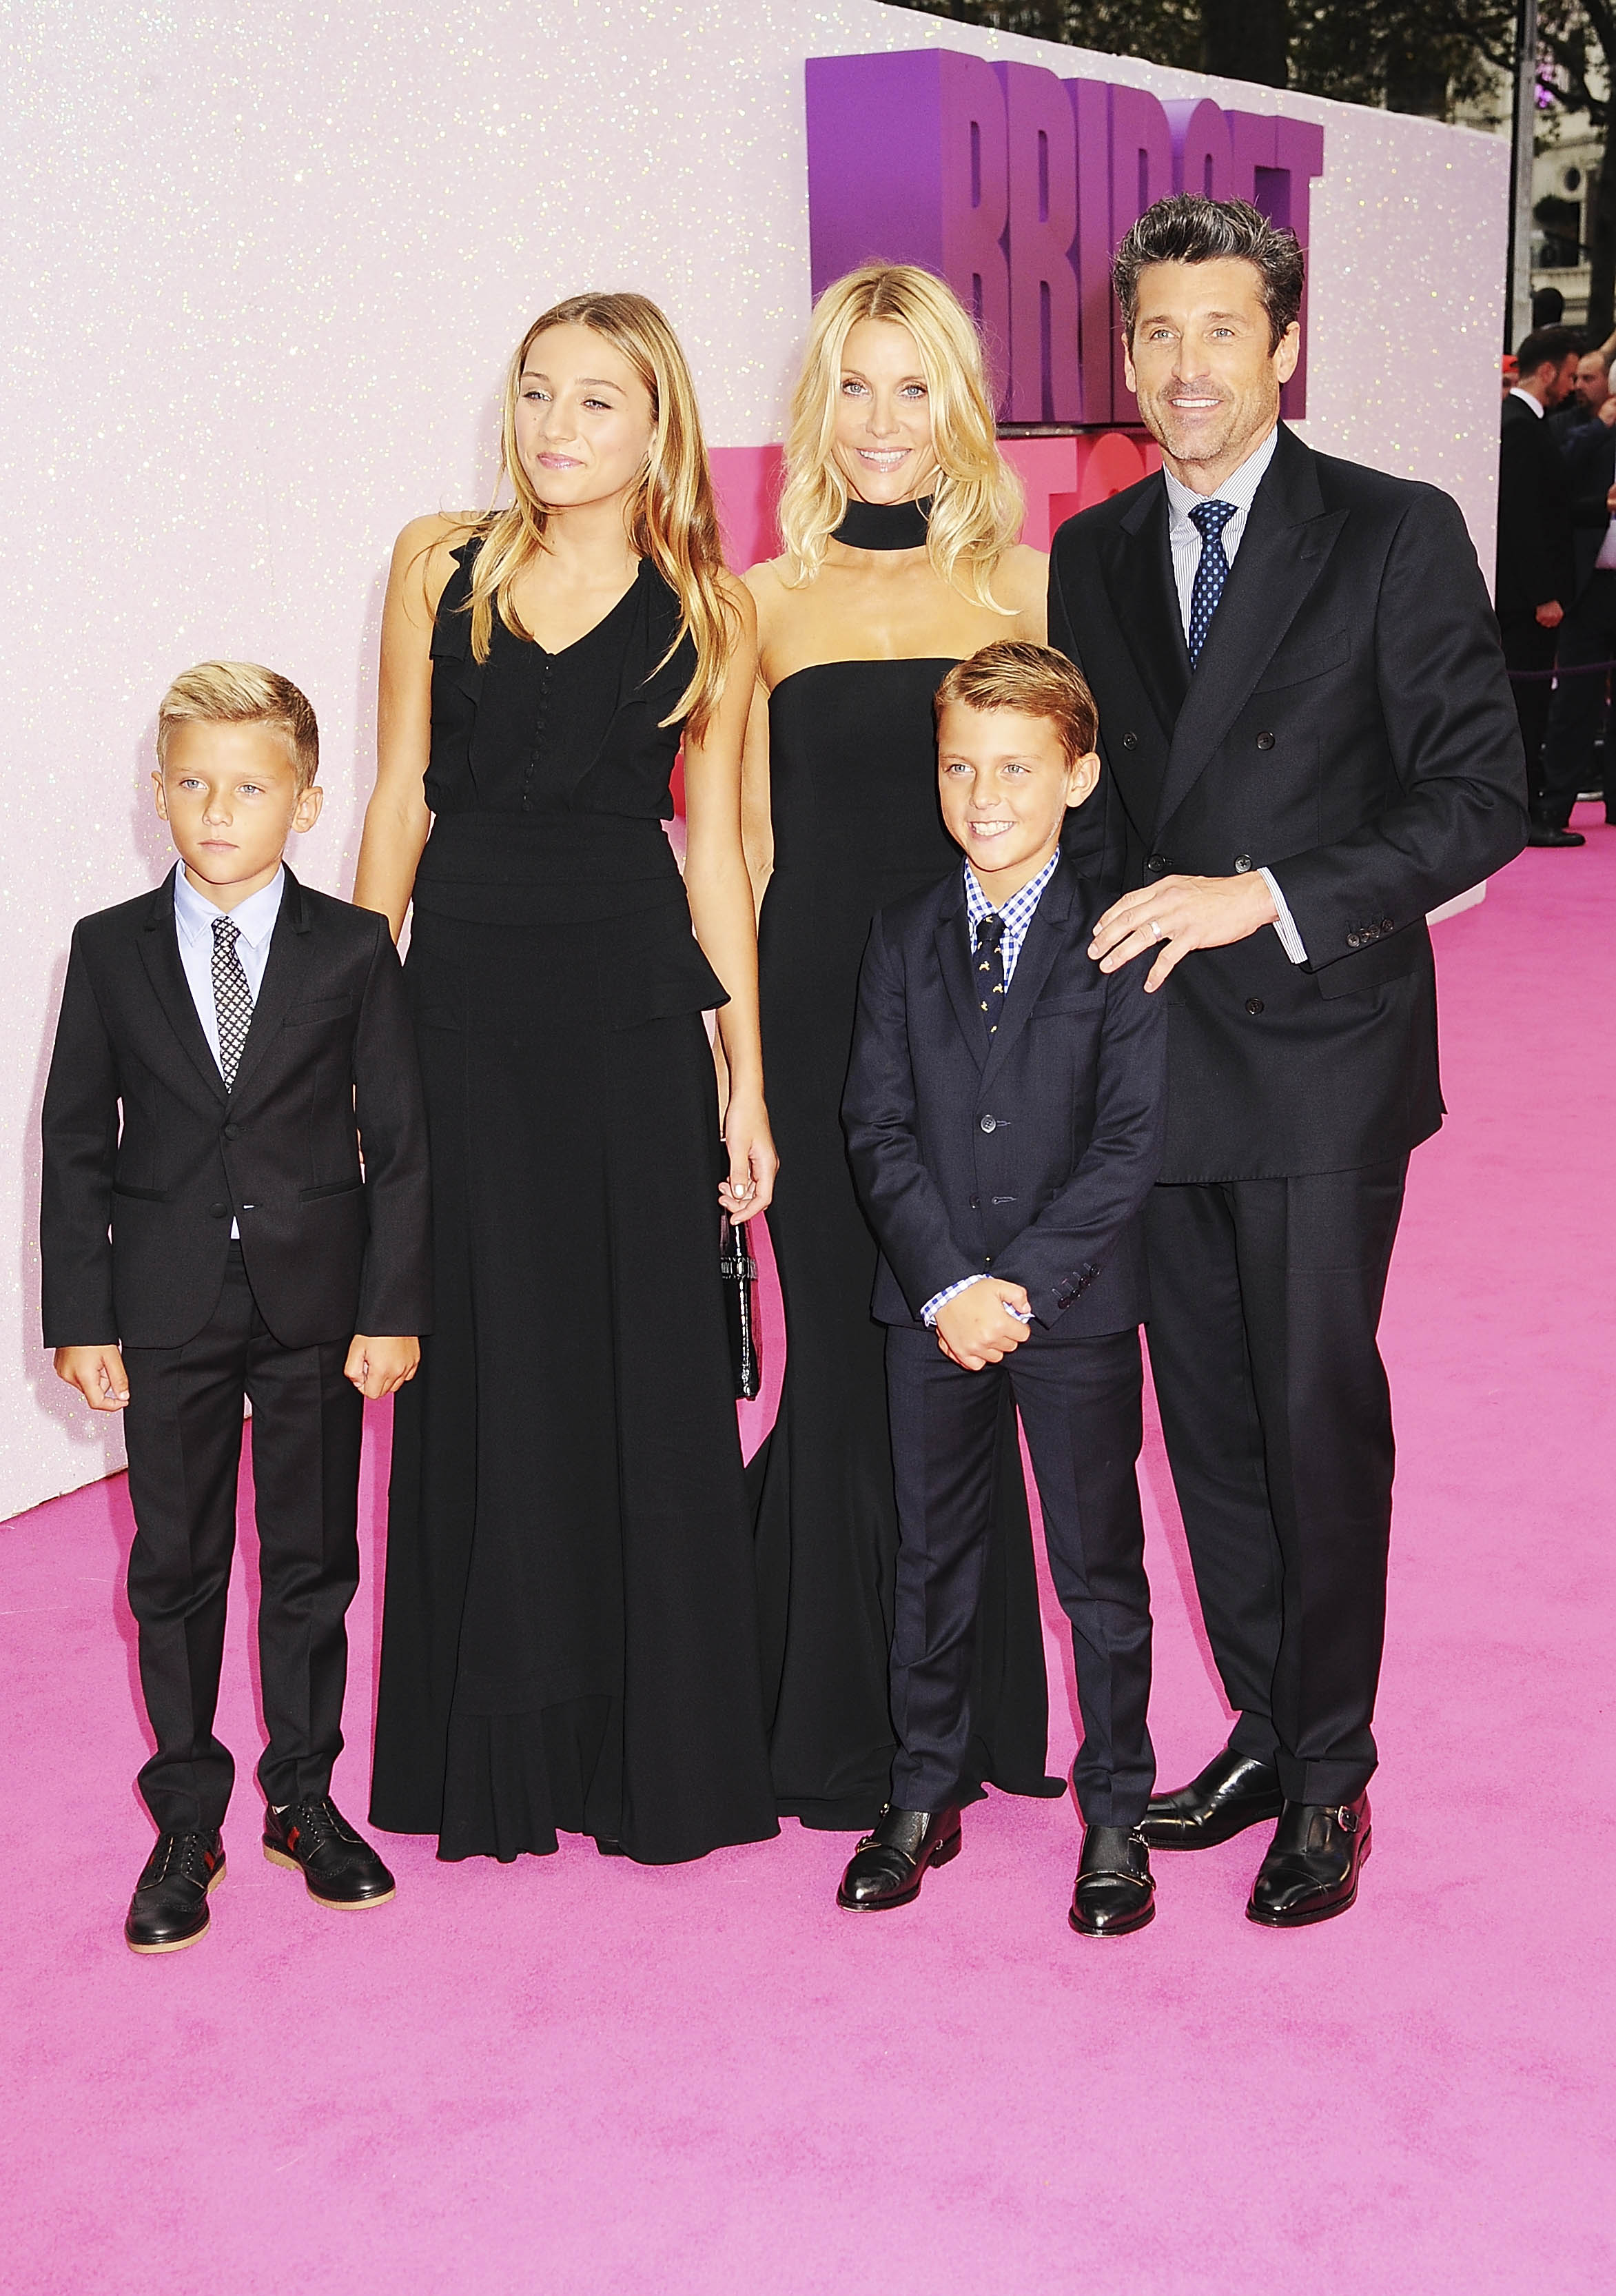 Patrick Dempsey with wife Jillian Fink and children arrive for the world premiere of "Bridget Jones's Baby" at Odeon Leicester Square on September 5, 2016 in London, England. | Source: Getty Images